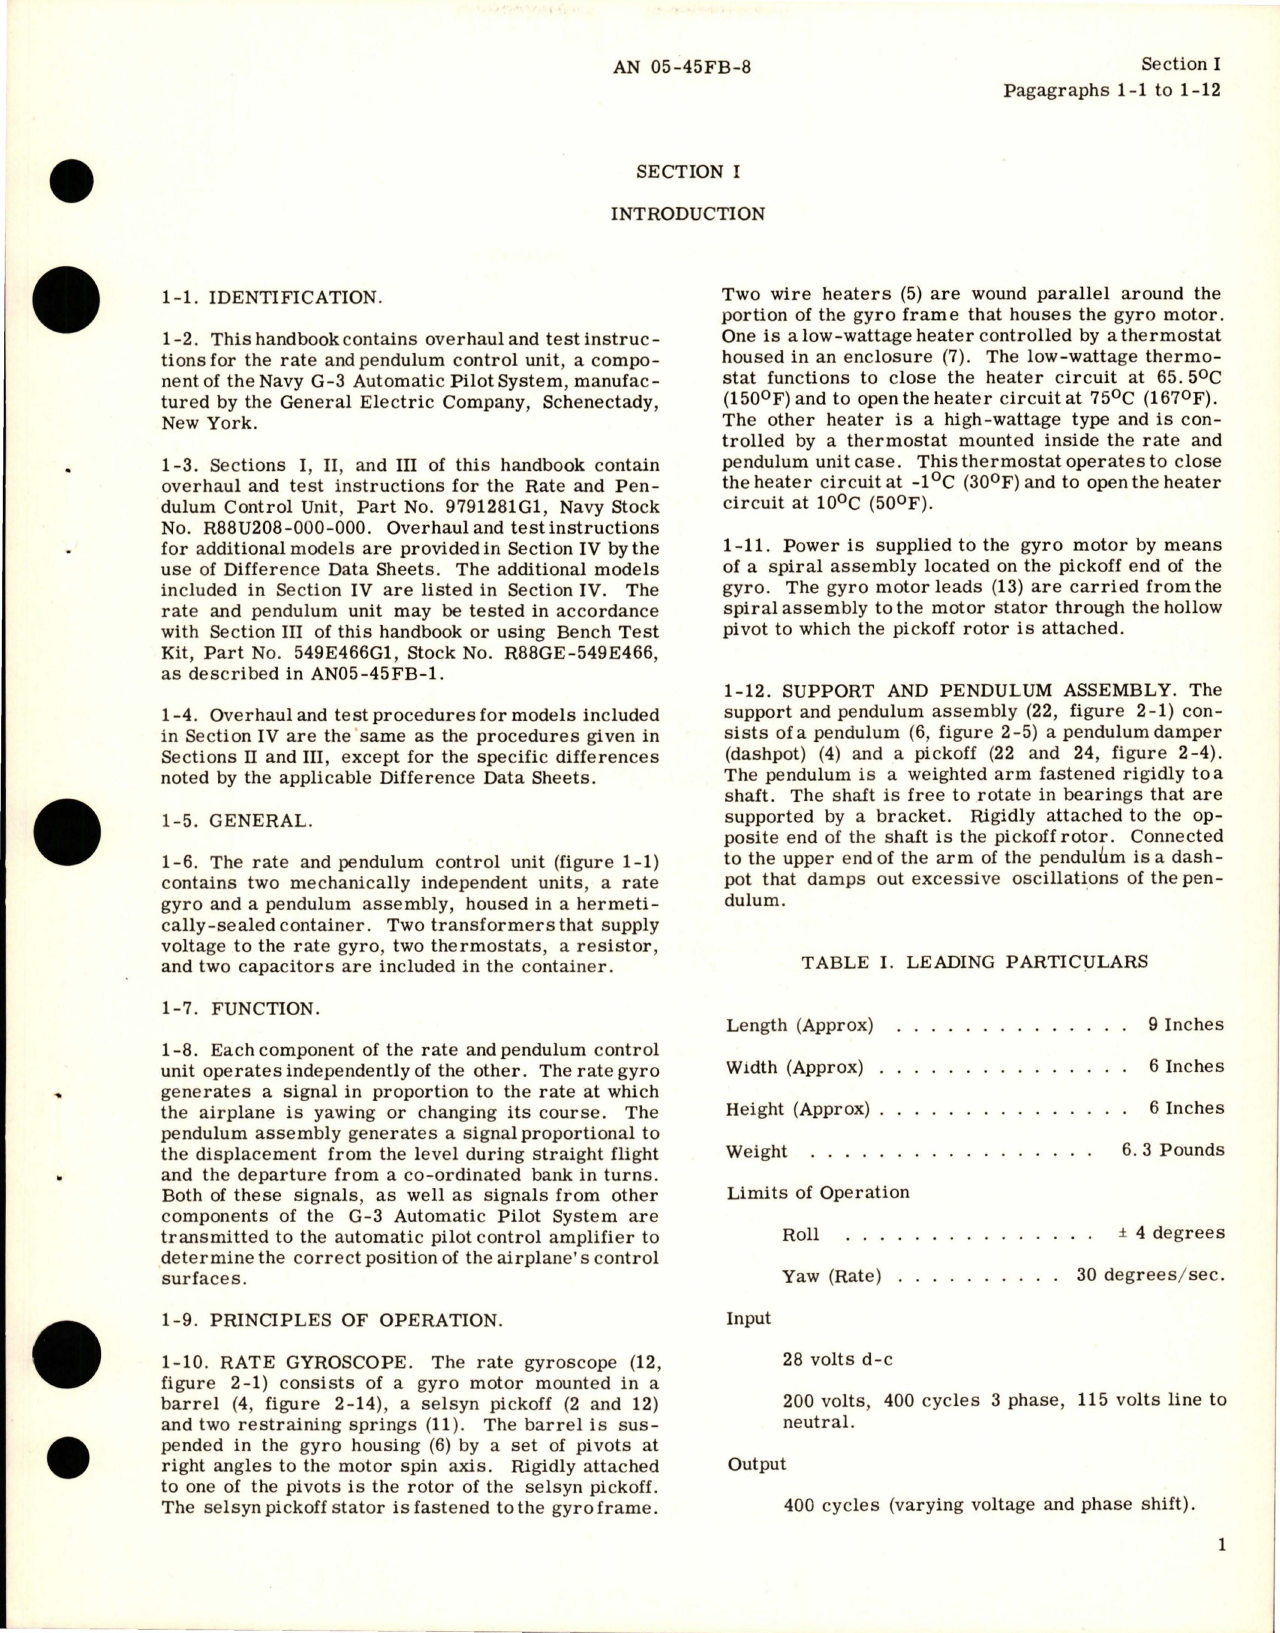 Sample page 5 from AirCorps Library document: Overhaul Instructions for Rate and Pendulum Control Unit for G3 Automatic Pilot - Models 2CJ4B1 and 2CJ4B3 